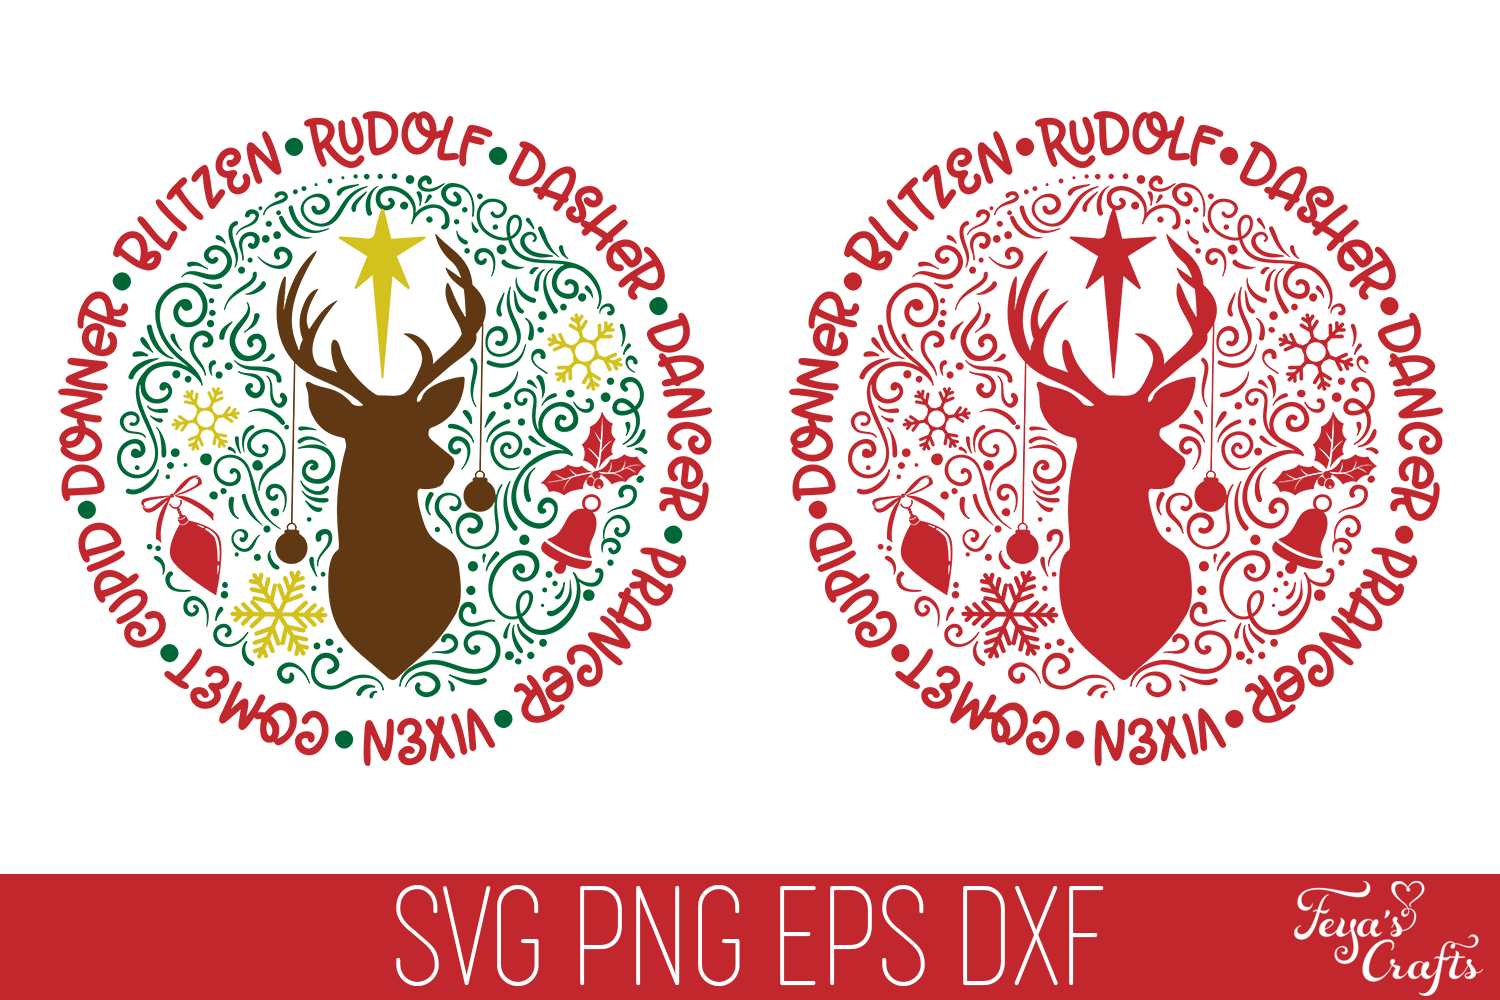 Download Reindeer Names Svg Round Christmas Ornaments Svg By Anastasia Feya Fonts Svg Cut Files Thehungryjpeg Com